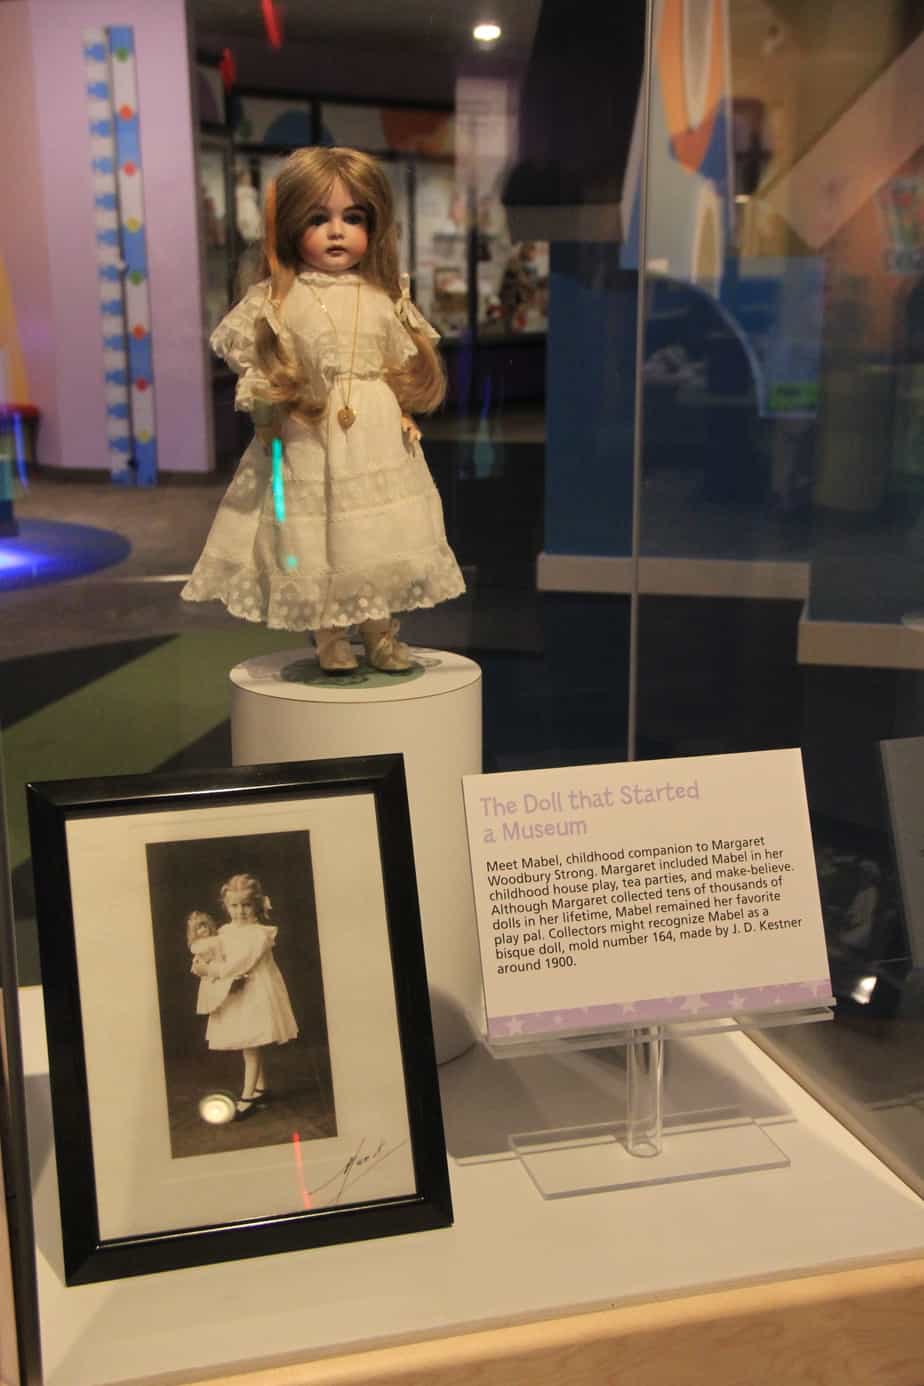 Margaret Strong with Mabel National Museum of Play